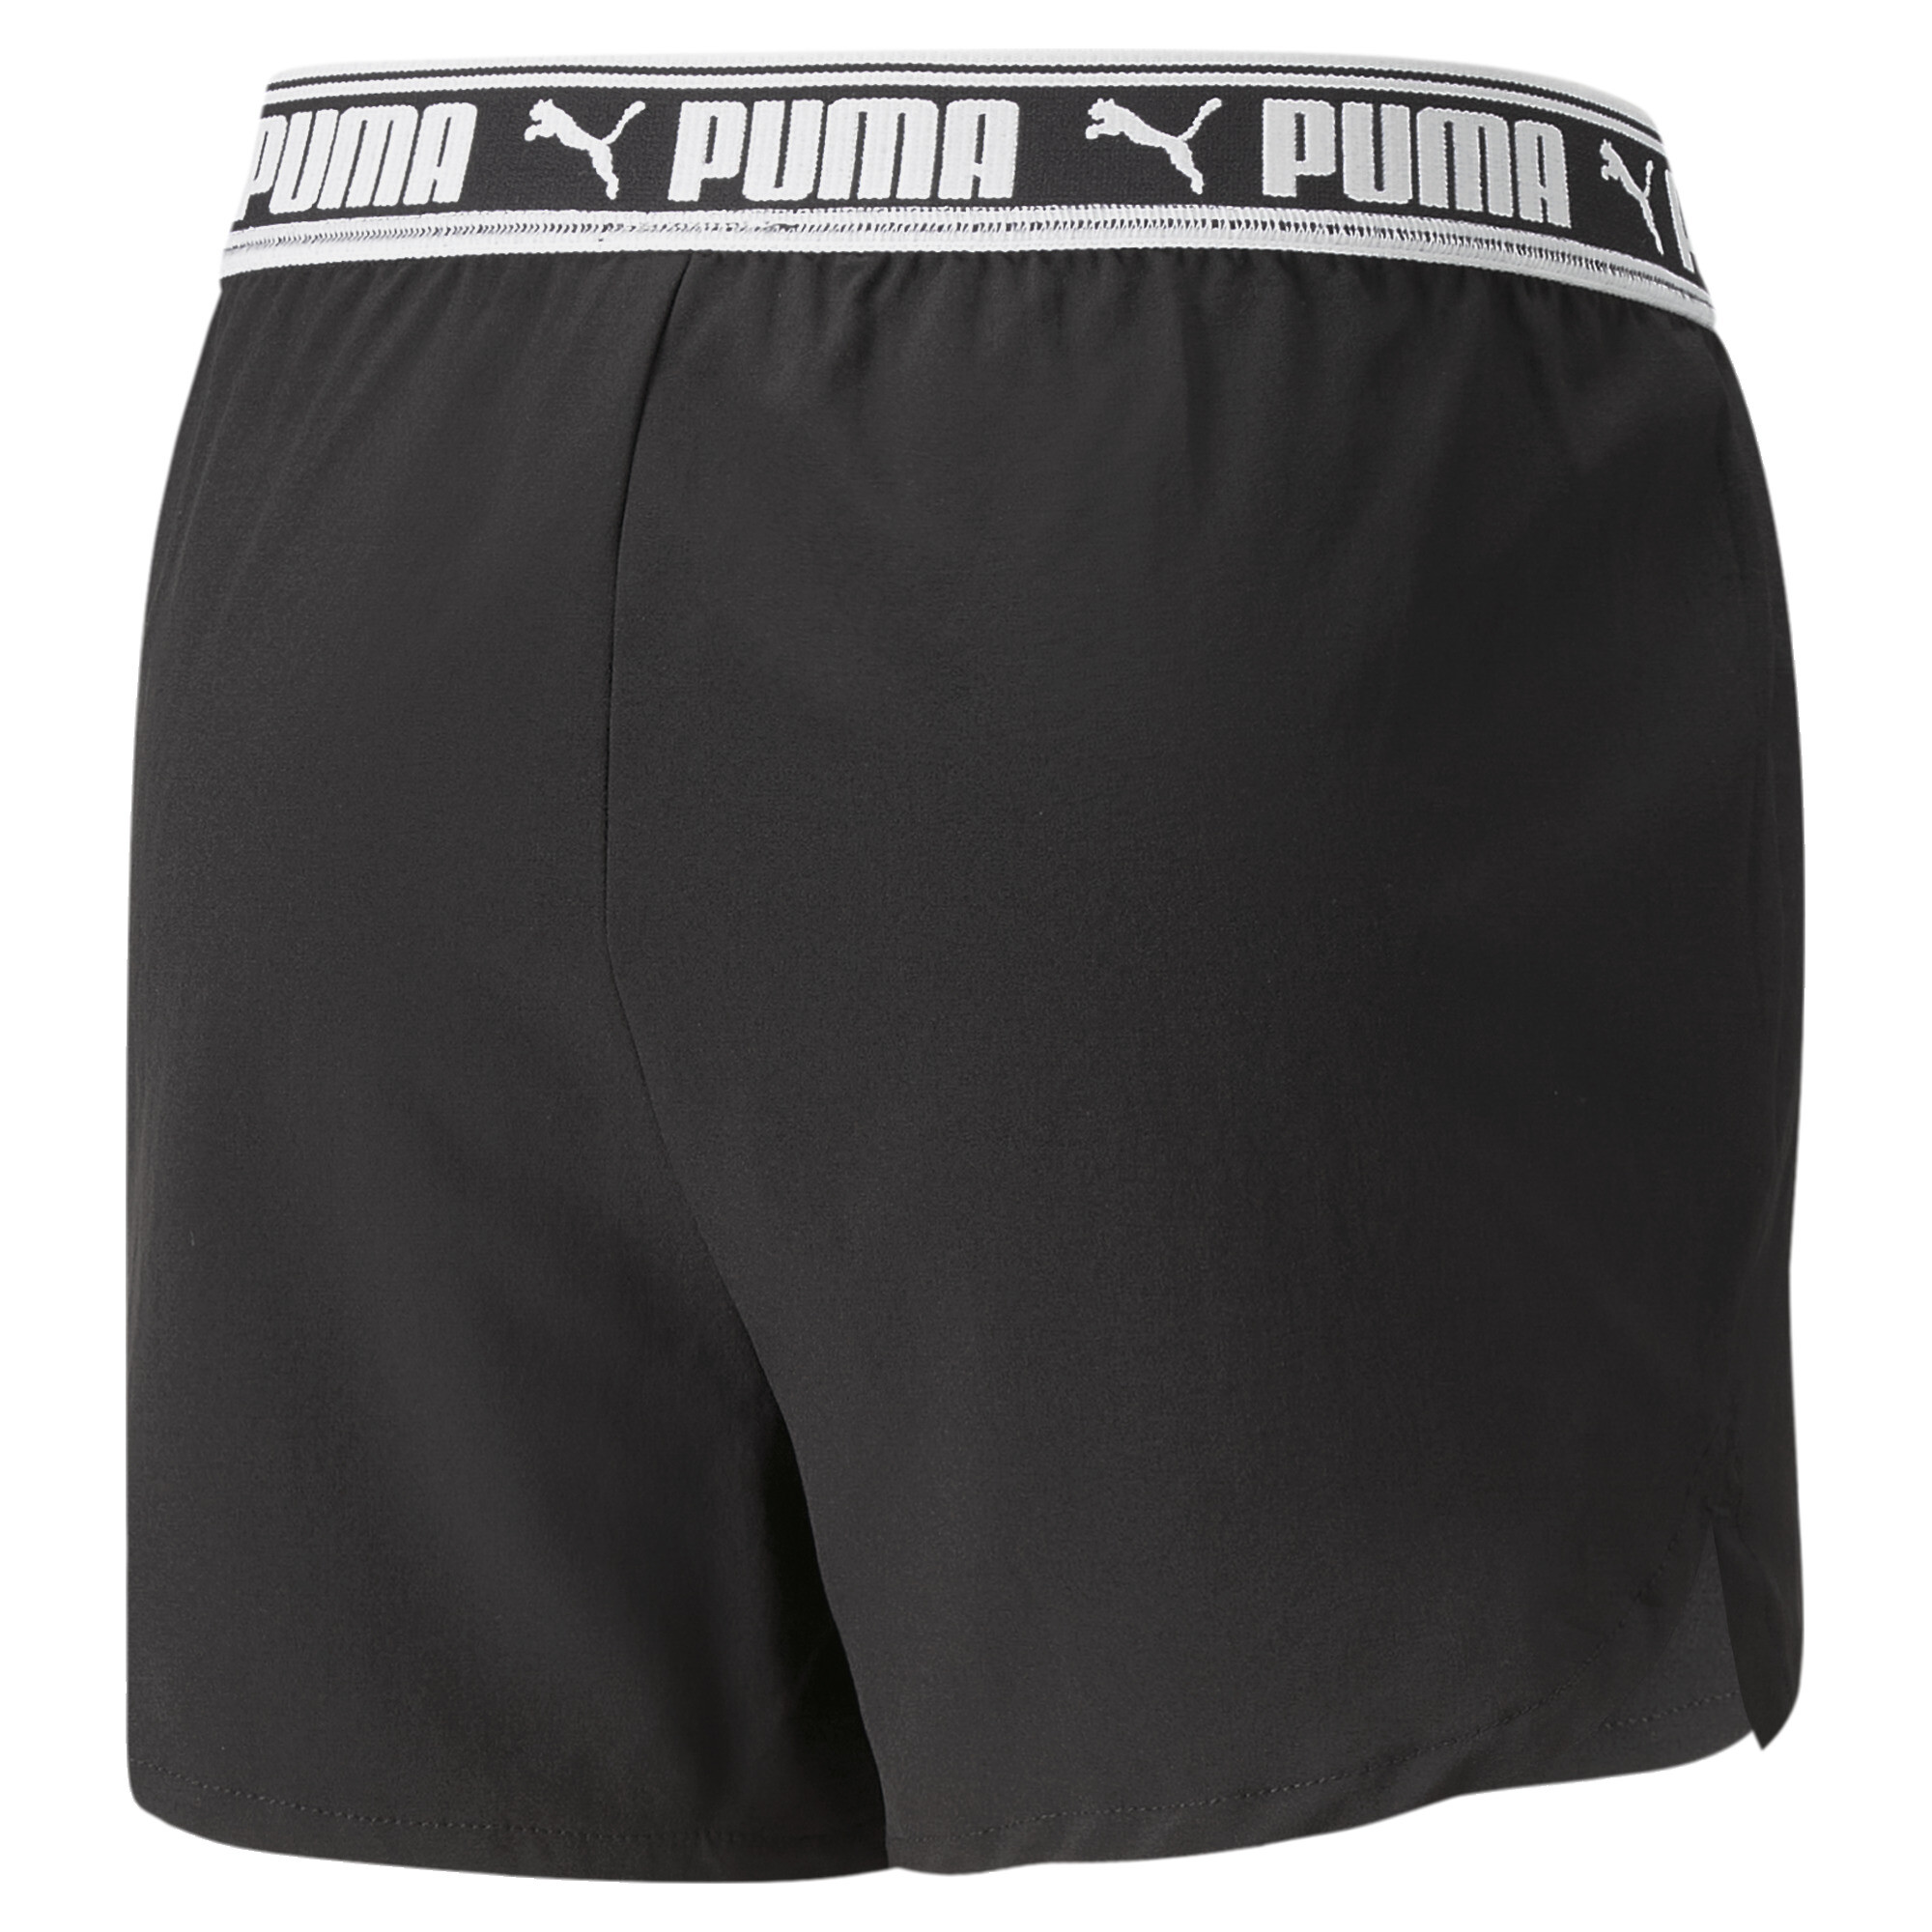 Puma Strong Woven Shorts Youth, Black, Size 5-6Y, Clothing